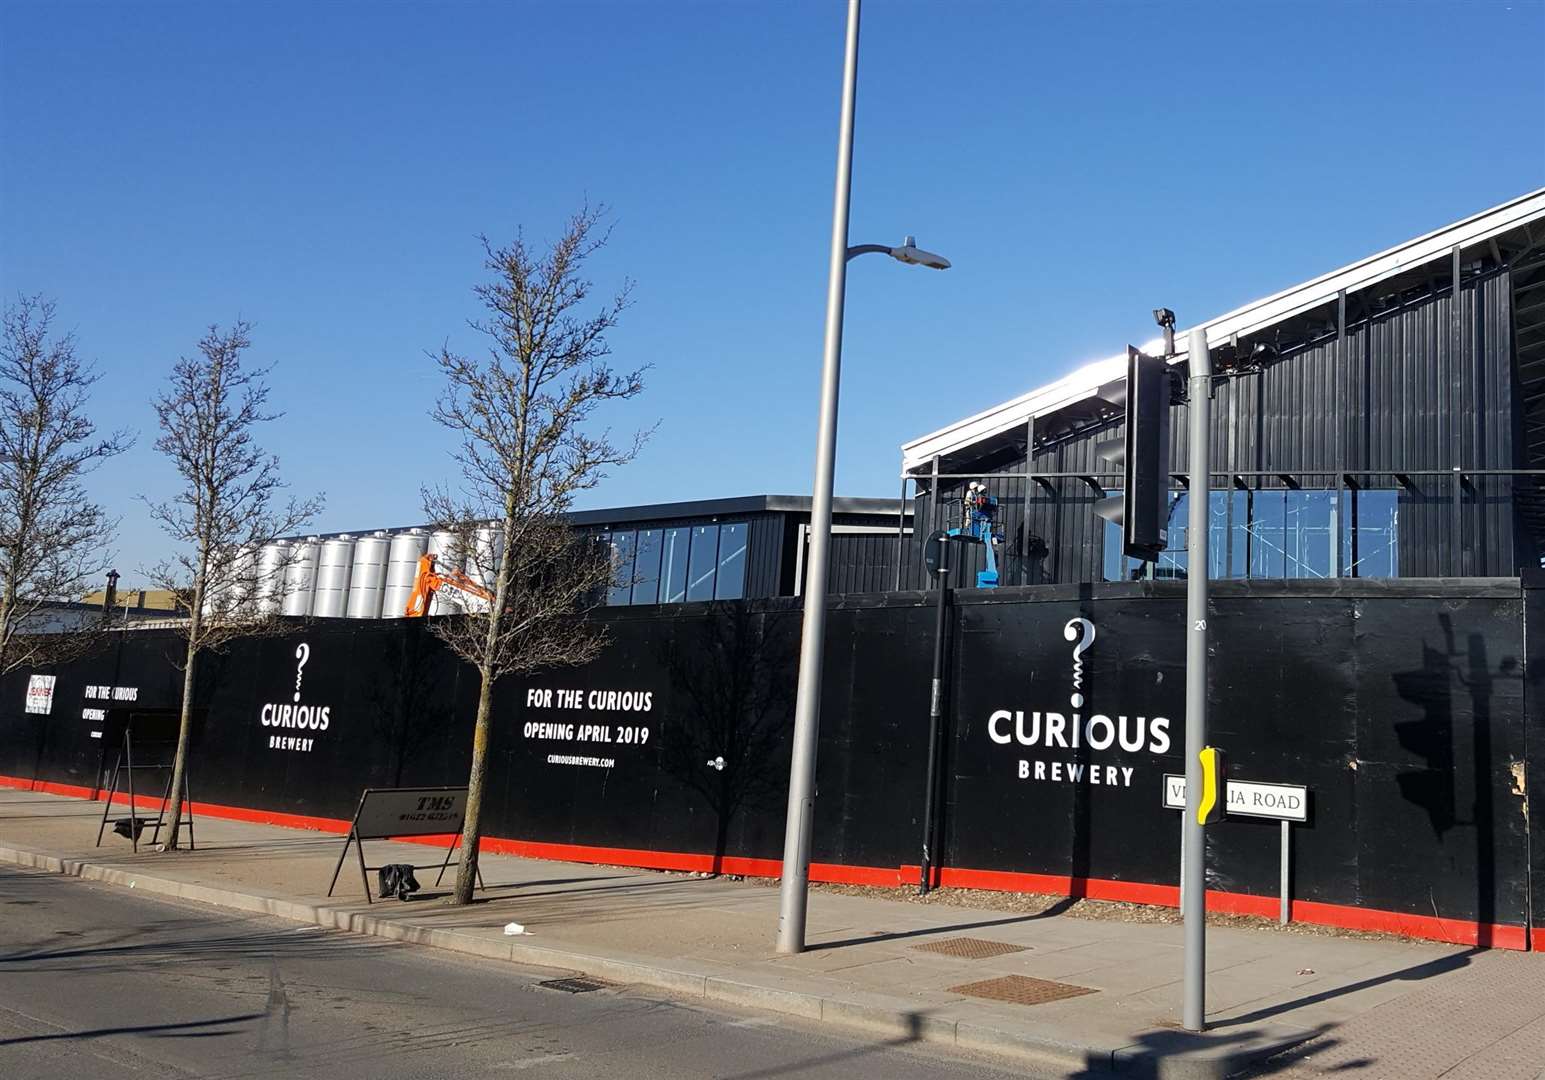 The Curious Brewery will now open on Friday, April 26